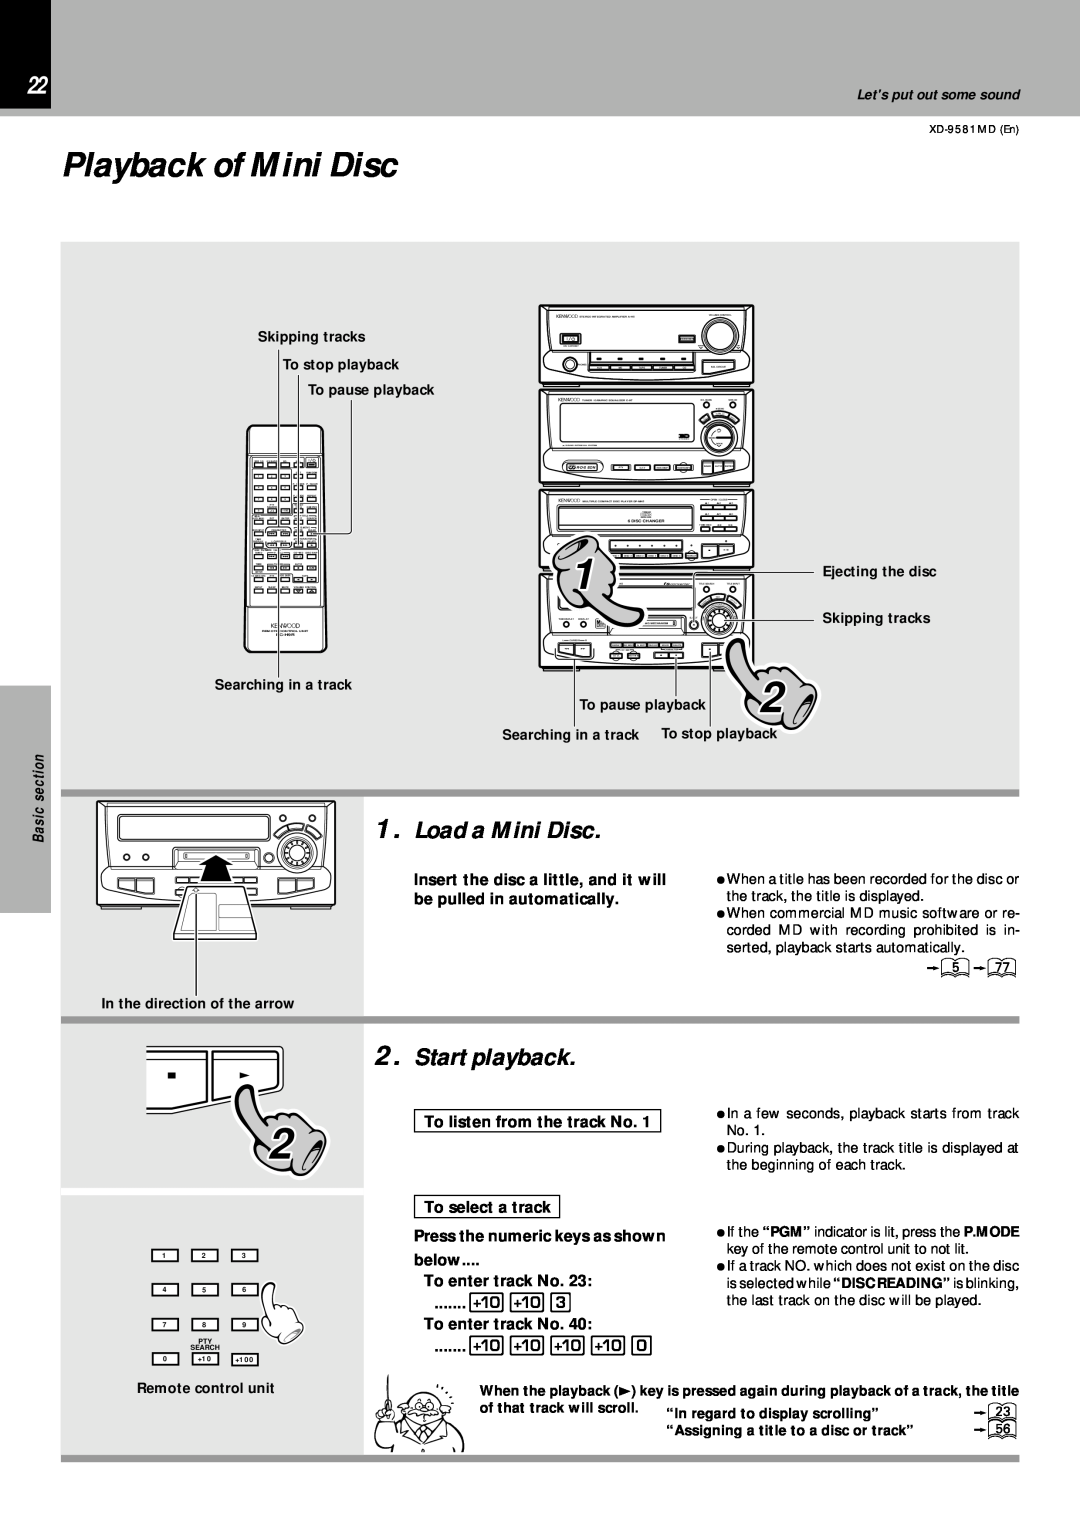 Kenwood XD-9581MD instruction manual Playback of Mini Disc, Load a Mini Disc, Start playback, Lets put out some sound 